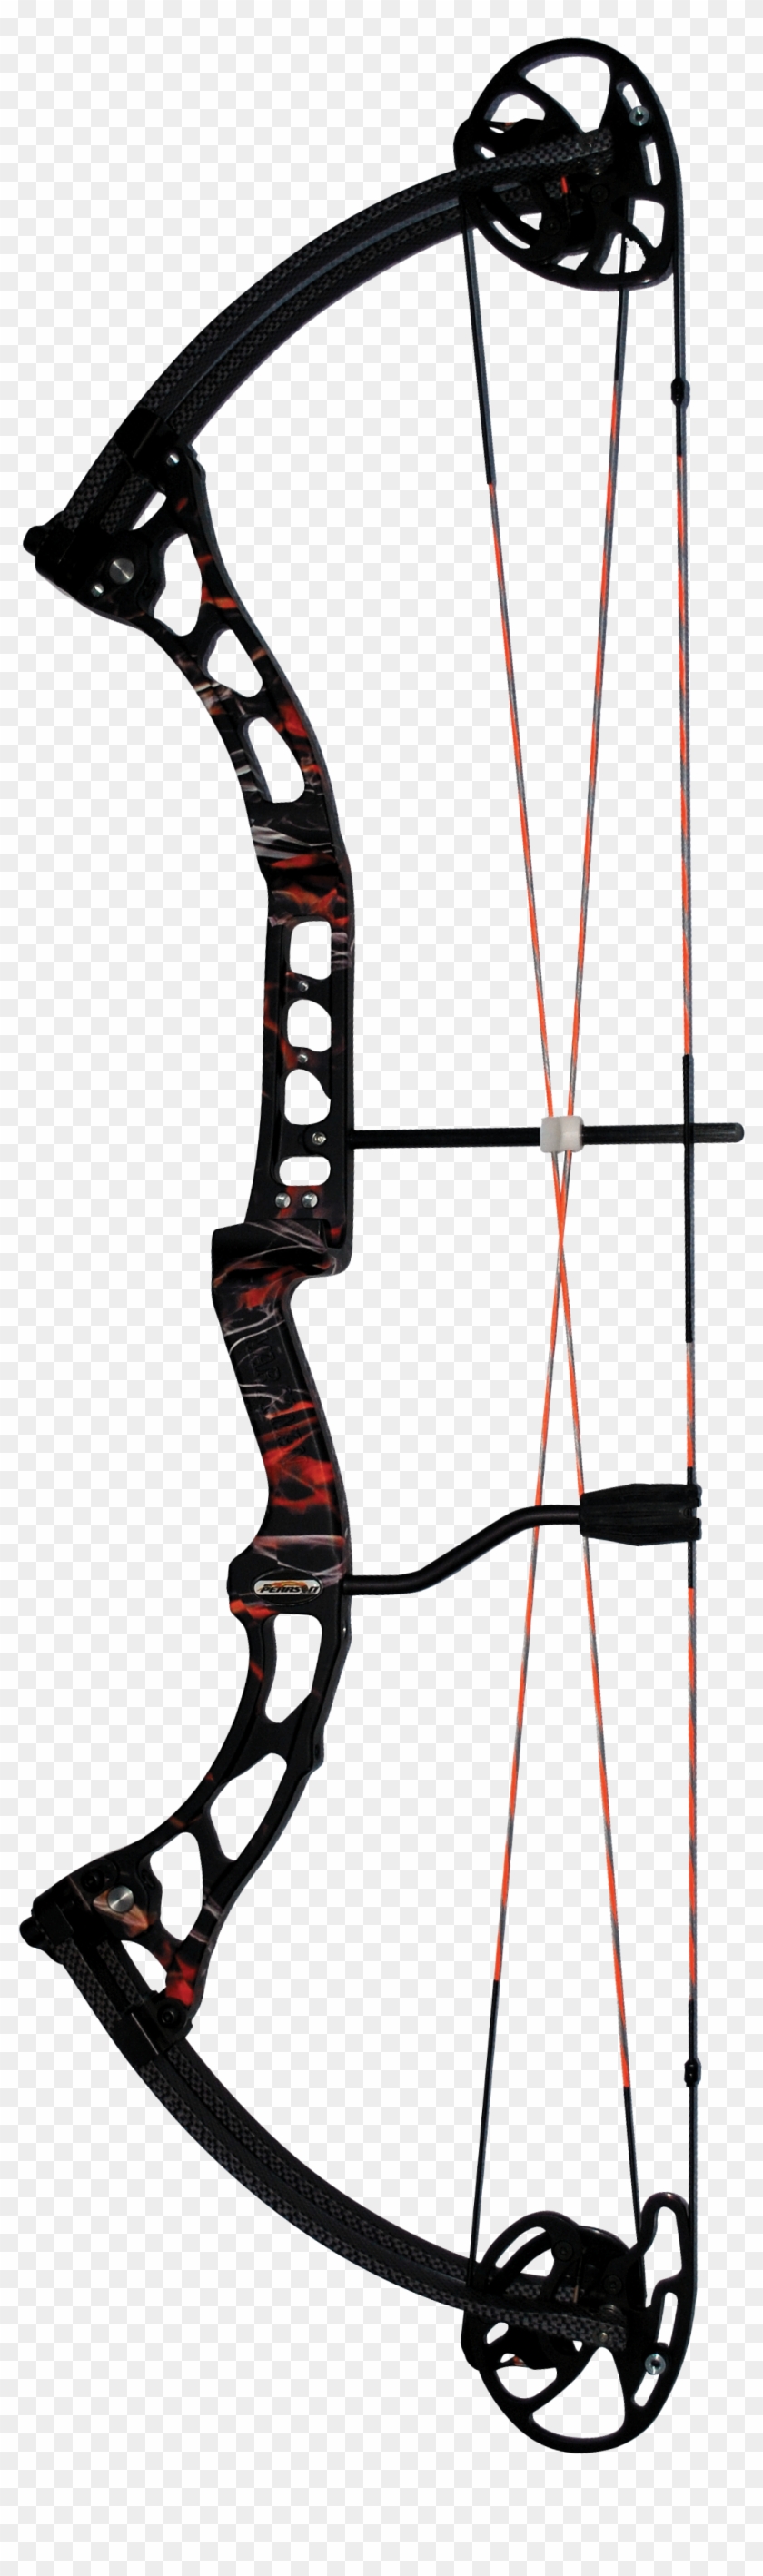 Free Compound Bow And Arrow Pink - Compound Bow #892868